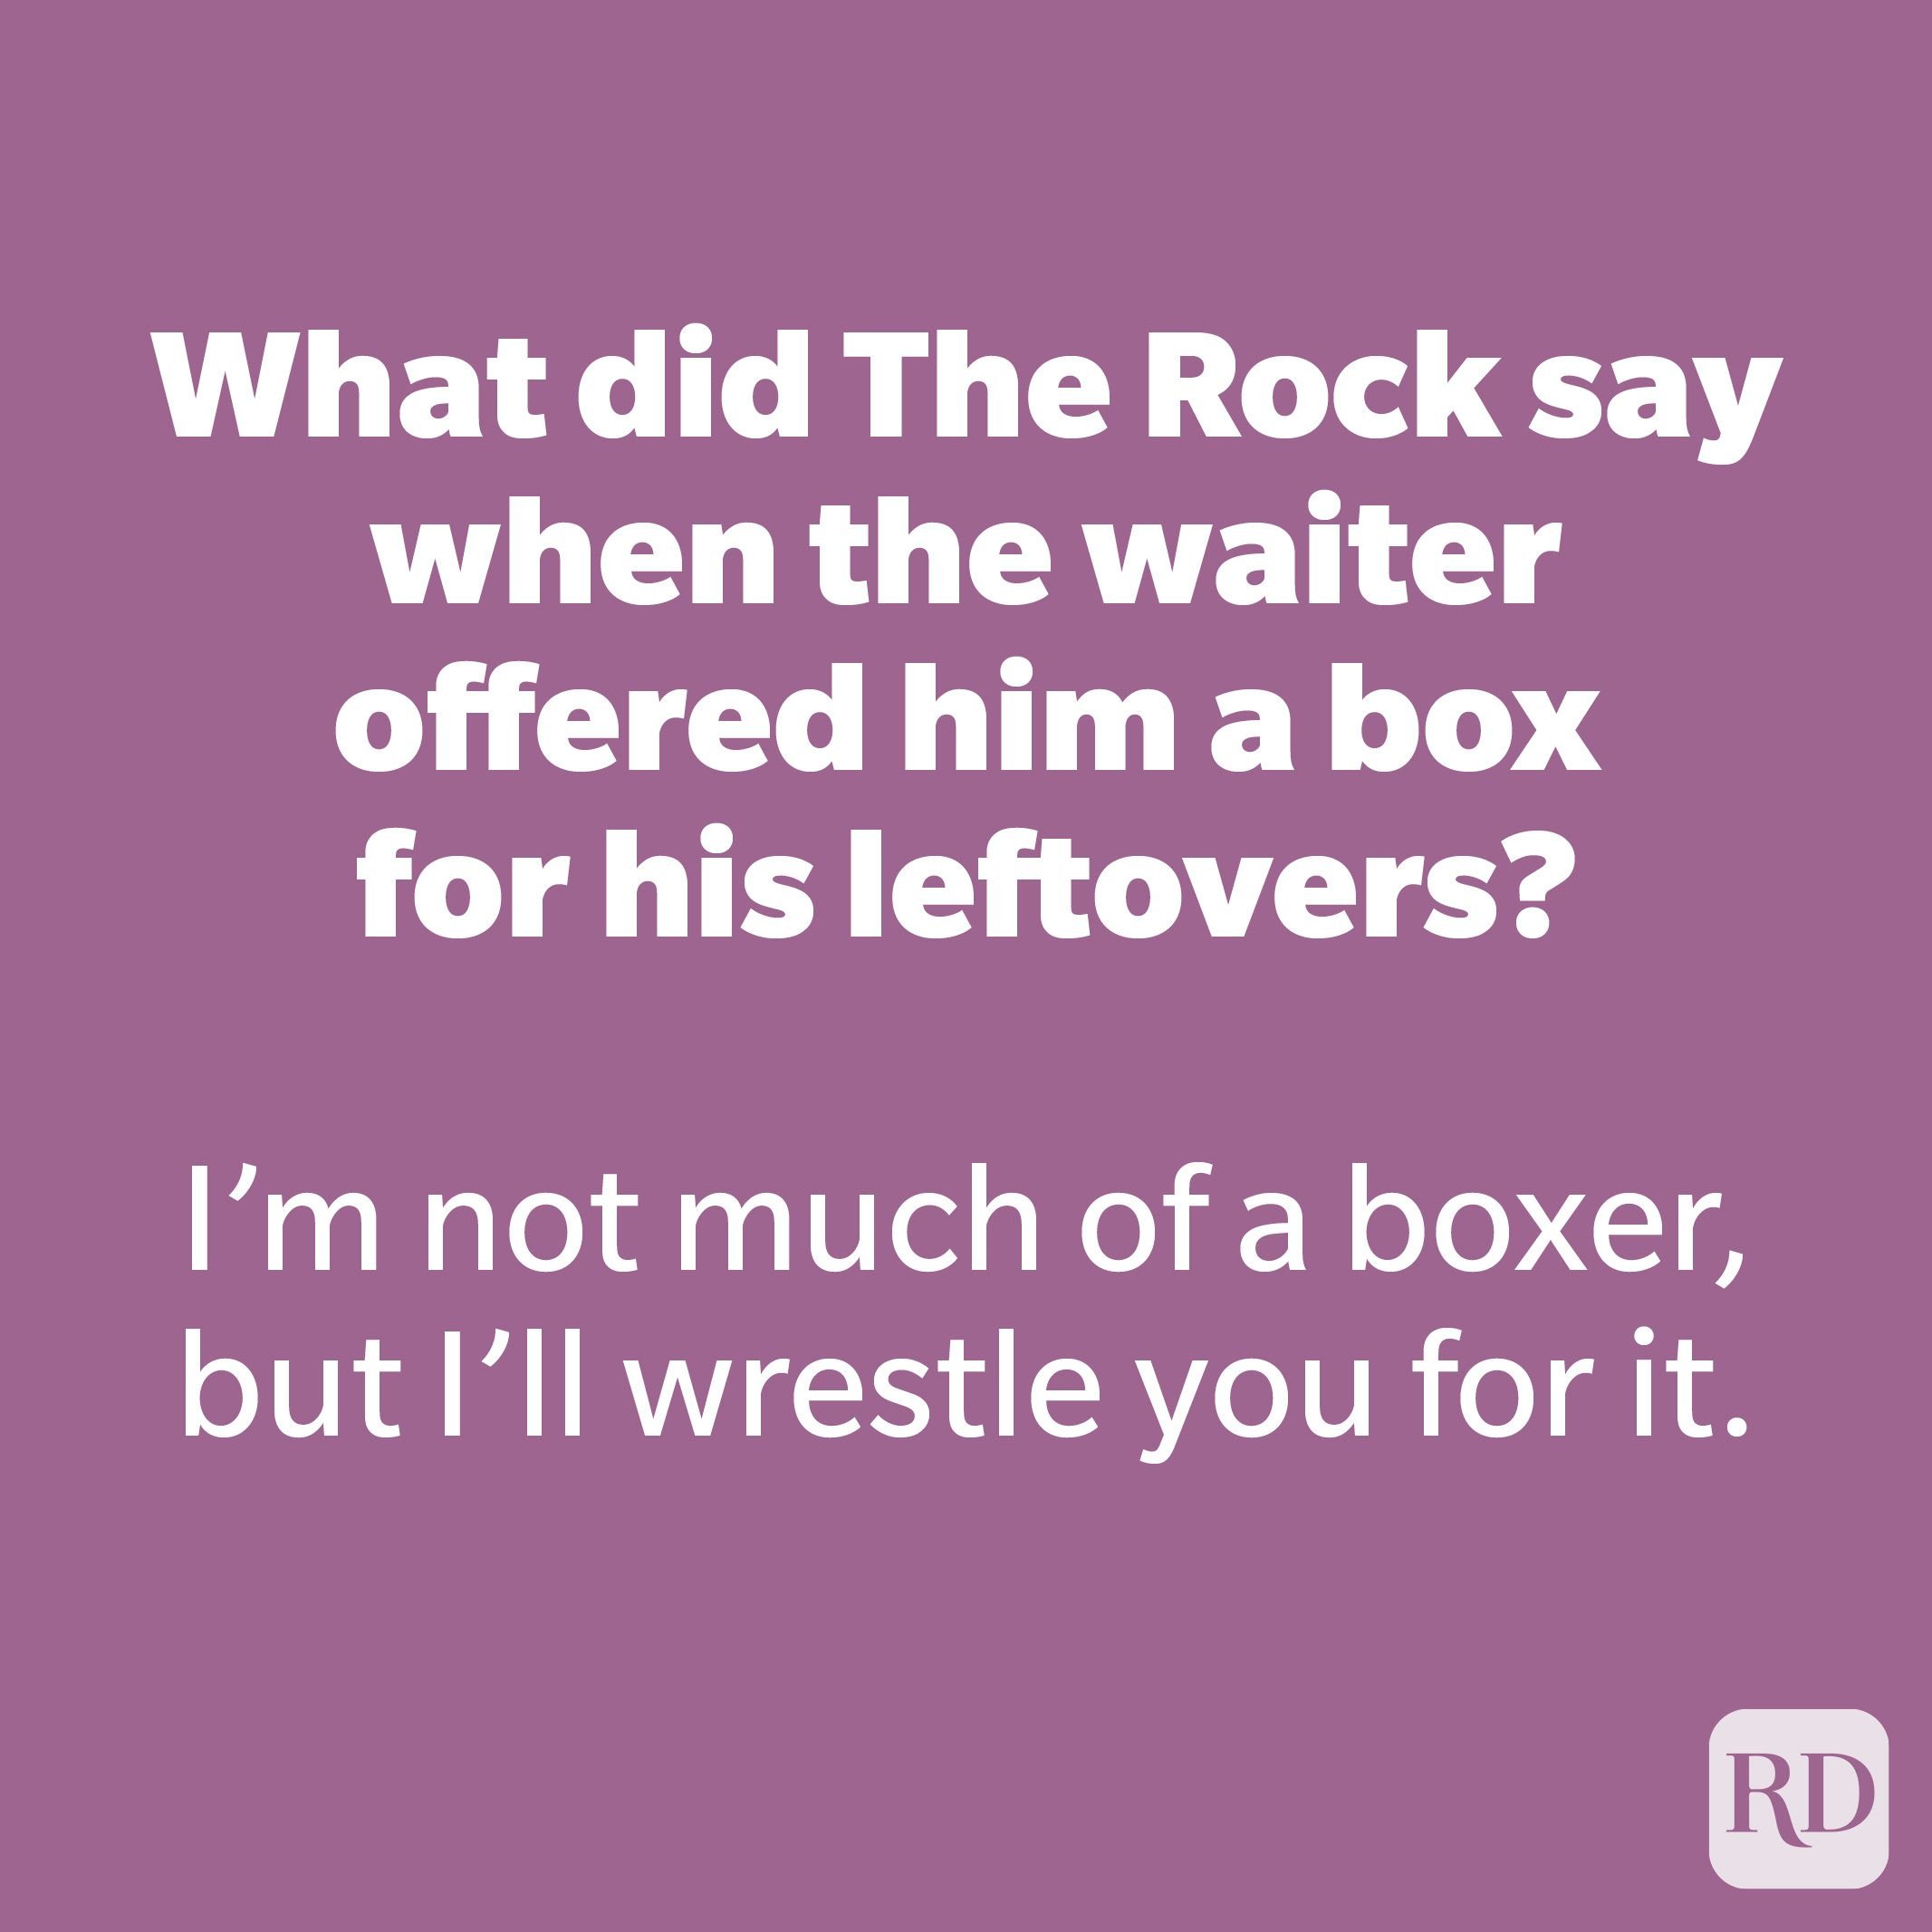 What did The Rock say when the waiter offered him a box for his leftovers? 